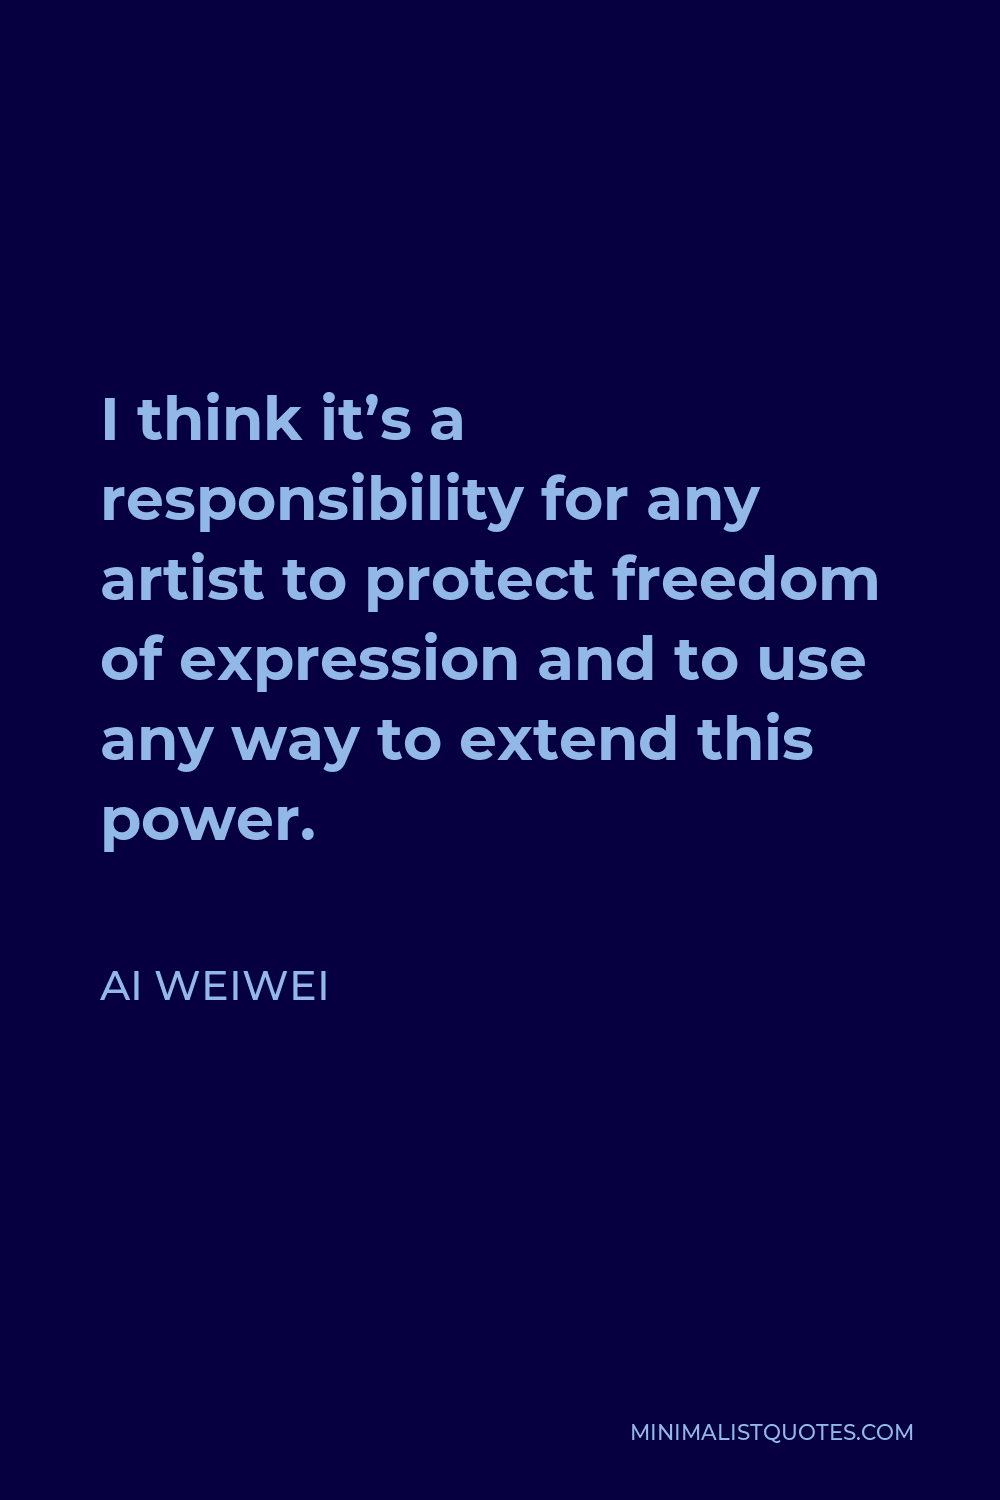 Ai Weiwei Quote - I think it’s a responsibility for any artist to protect freedom of expression and to use any way to extend this power.